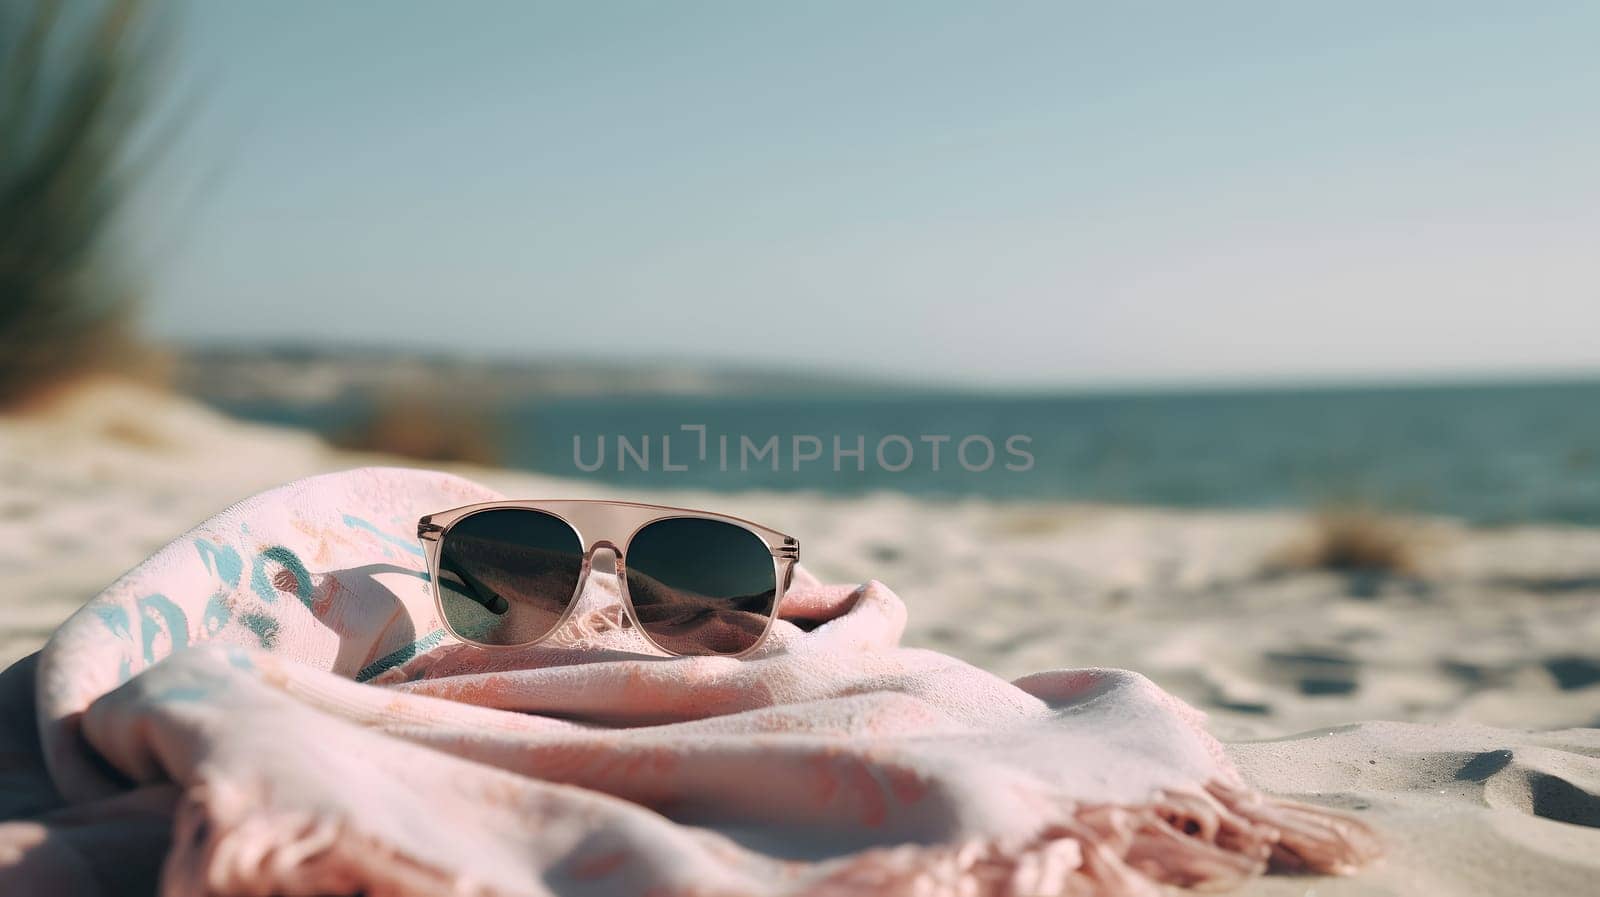 summer vacation scene on sunny sand beach with towel and sunglasses, neural network generated art by z1b